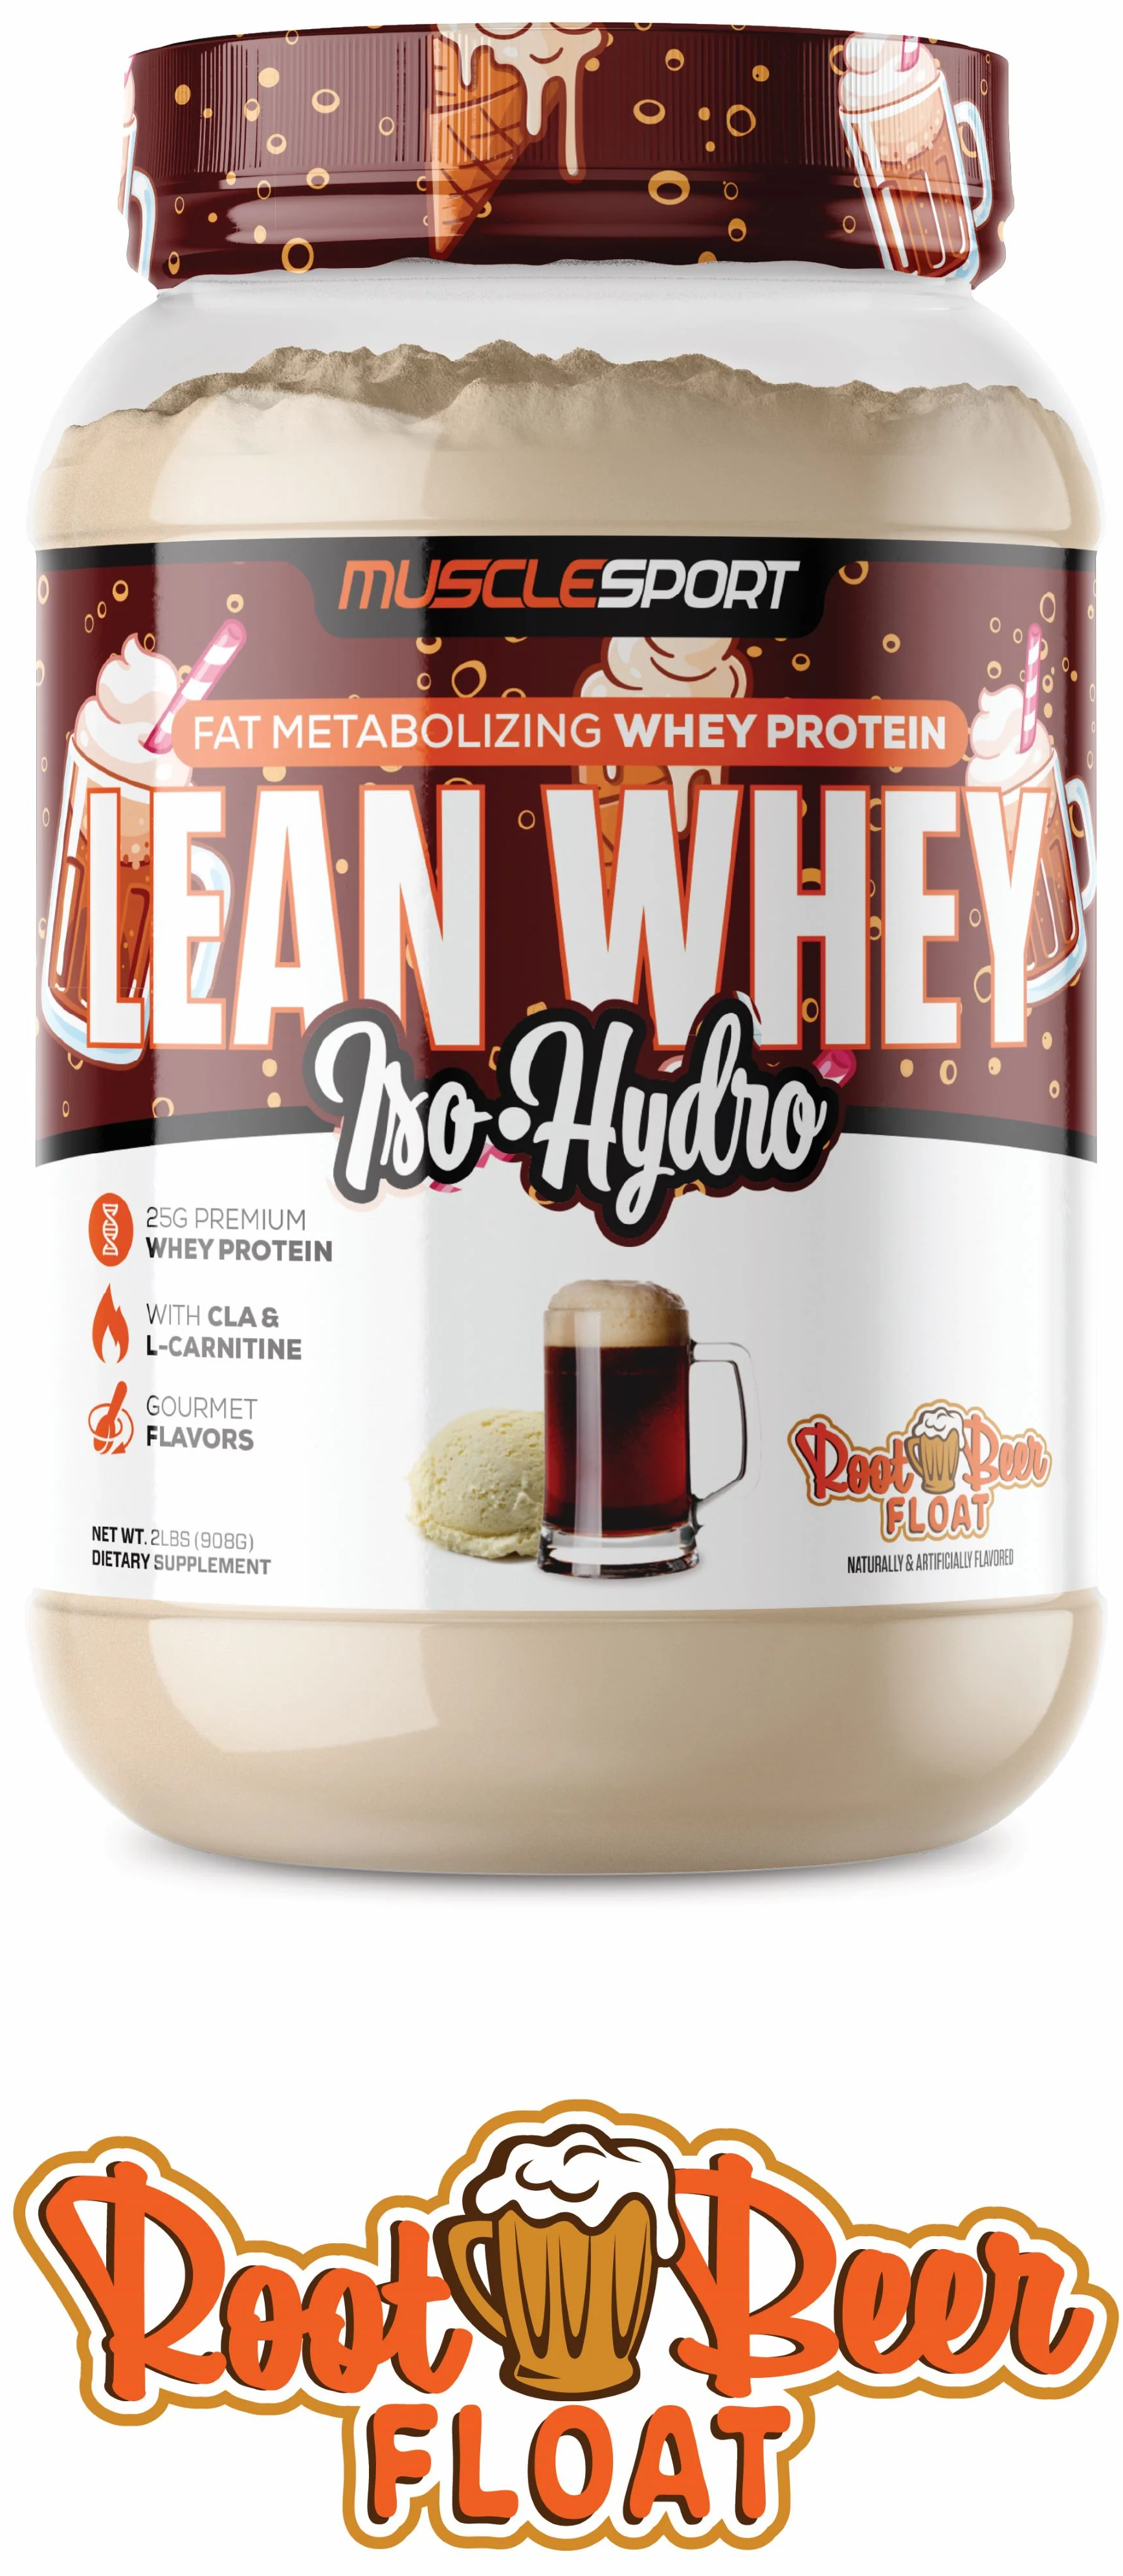 MuscleSport Lean Whey Root Beer Float